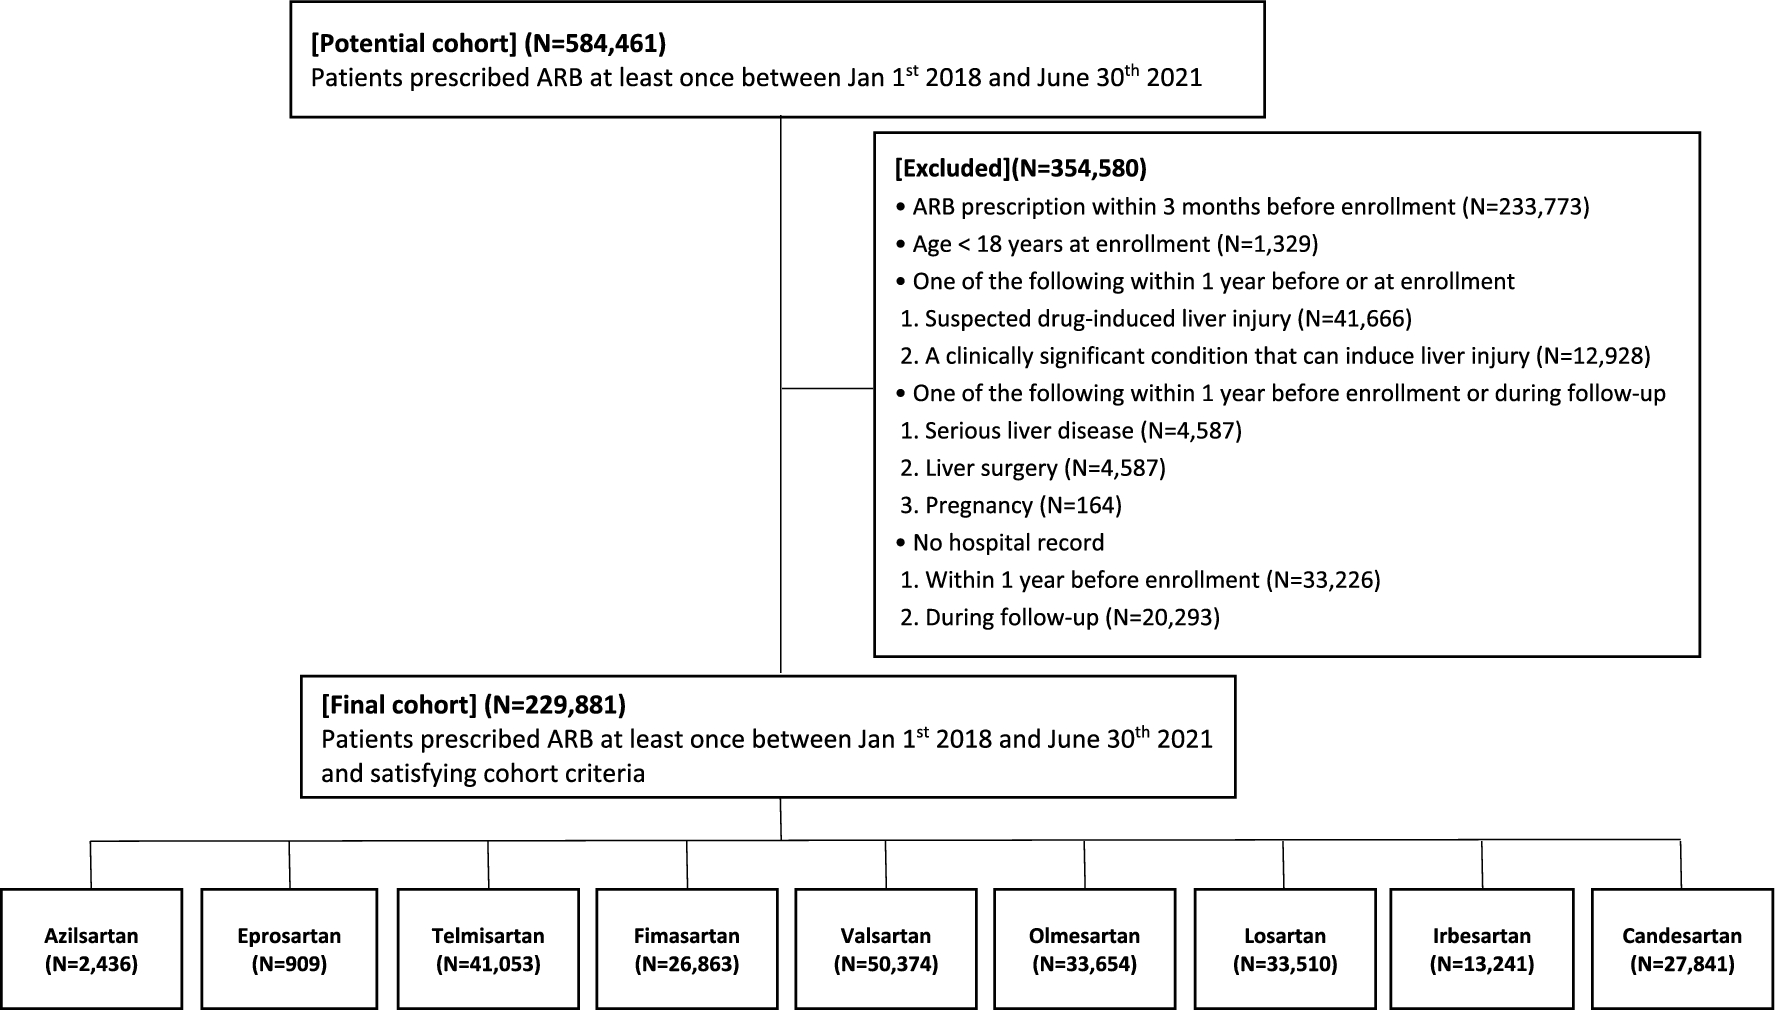 Angiotensin Receptor Blockers and the Risk of Suspected Drug-Induced Liver Injury: A Retrospective Cohort Study Using Electronic Health Record-Based Common Data Model in South Korea